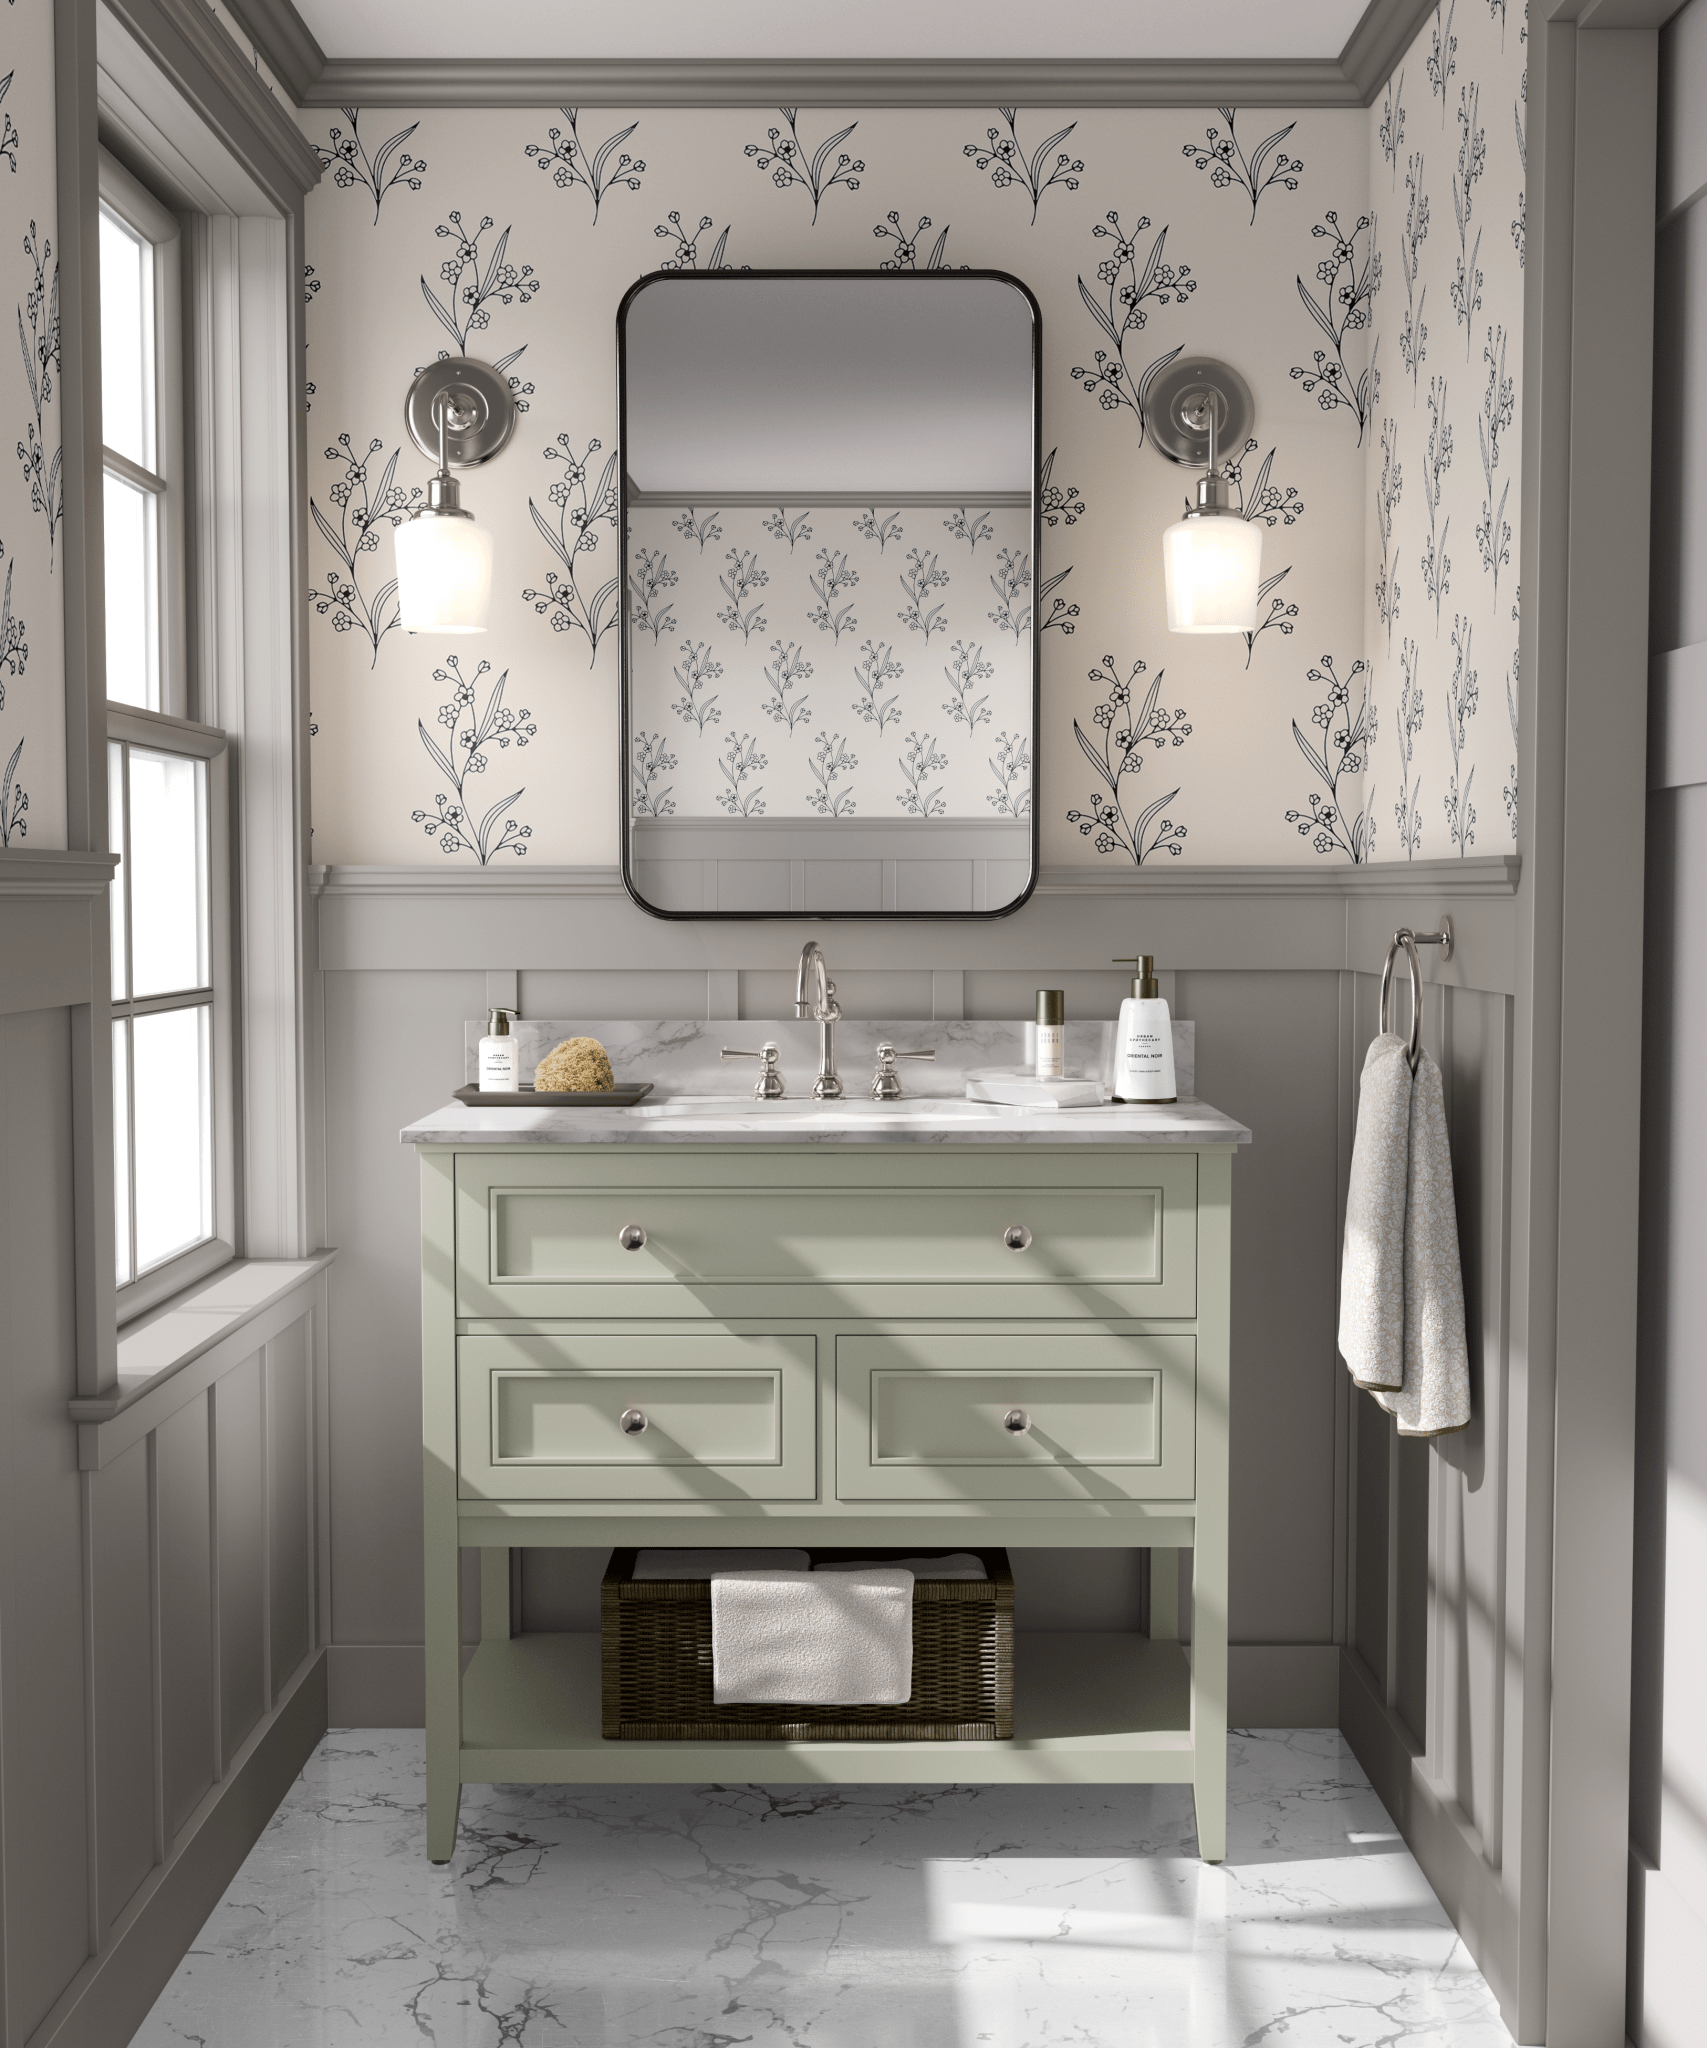 A bathroom featuring twig-patterned peel and stick wallpaper, a green vanity, and marble floors